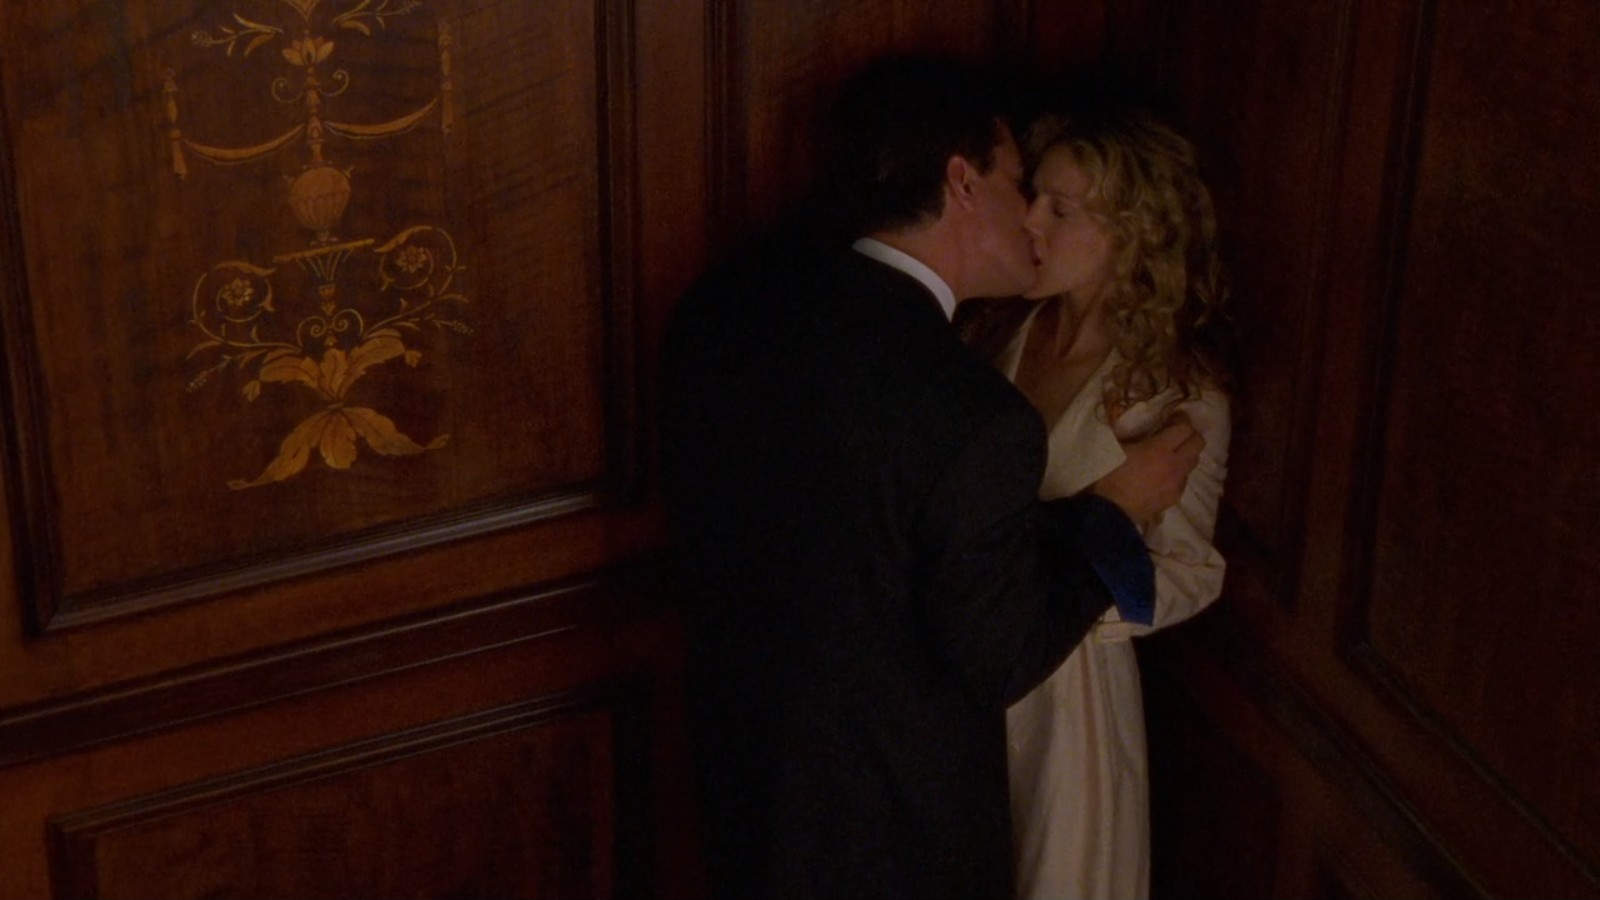 A man insistently kisses a woman in an elevator in this image from HBO Entertainment.